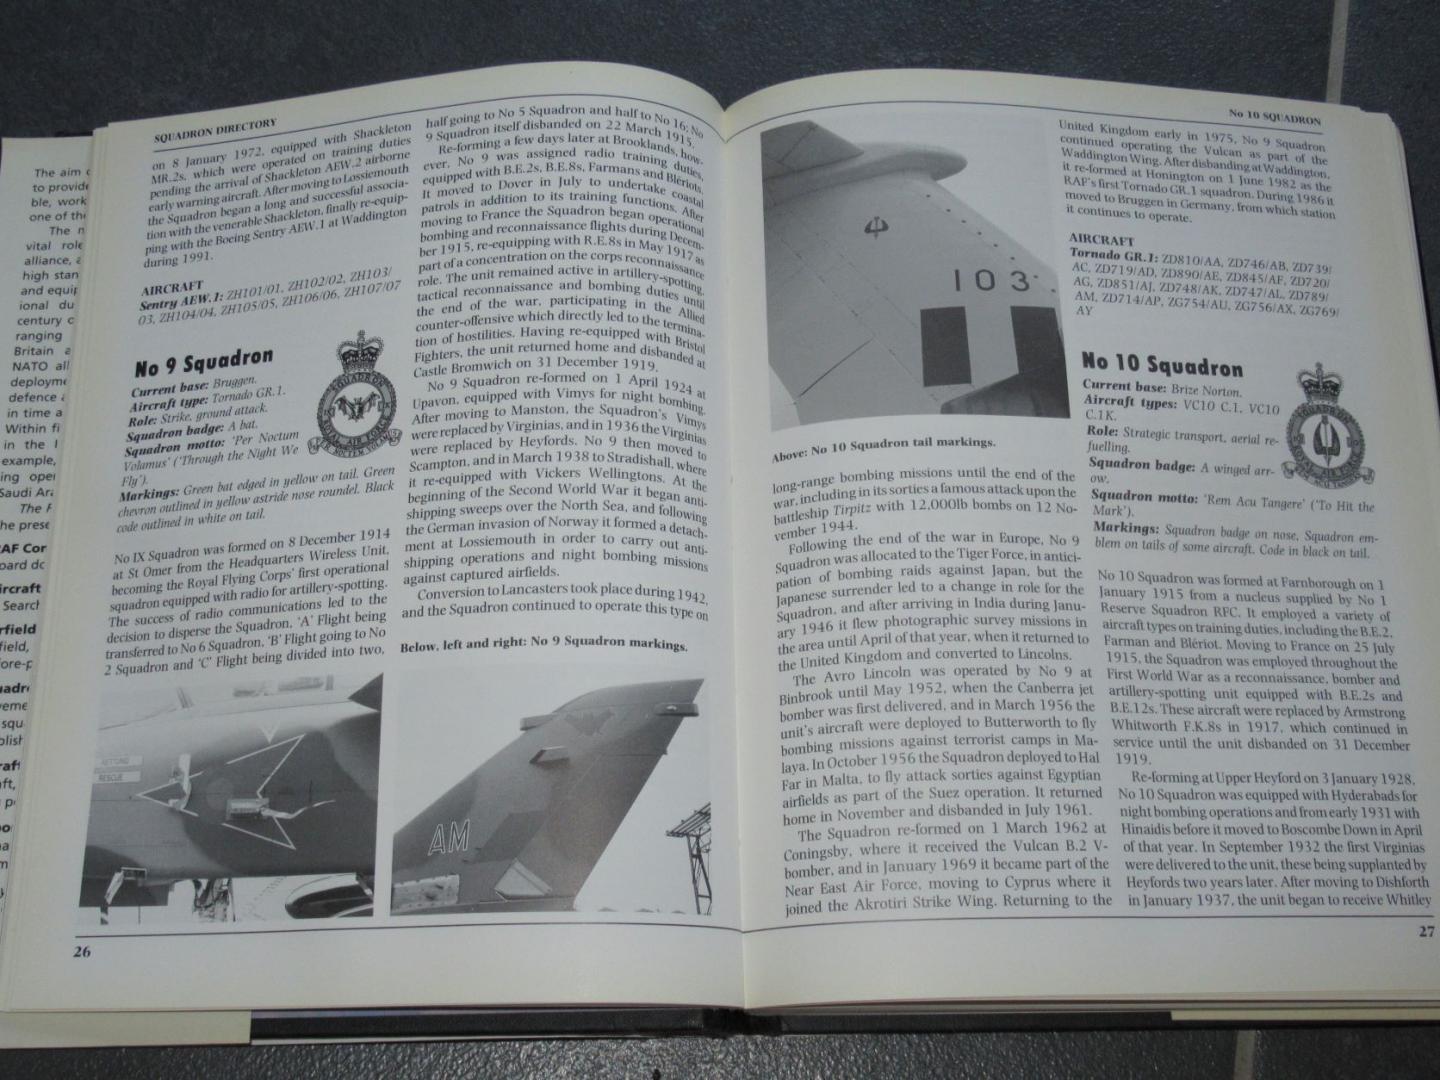 Laming, Tim - The Royal Air Force Manual : The Aircraft, Equipment and Organization of the RAF